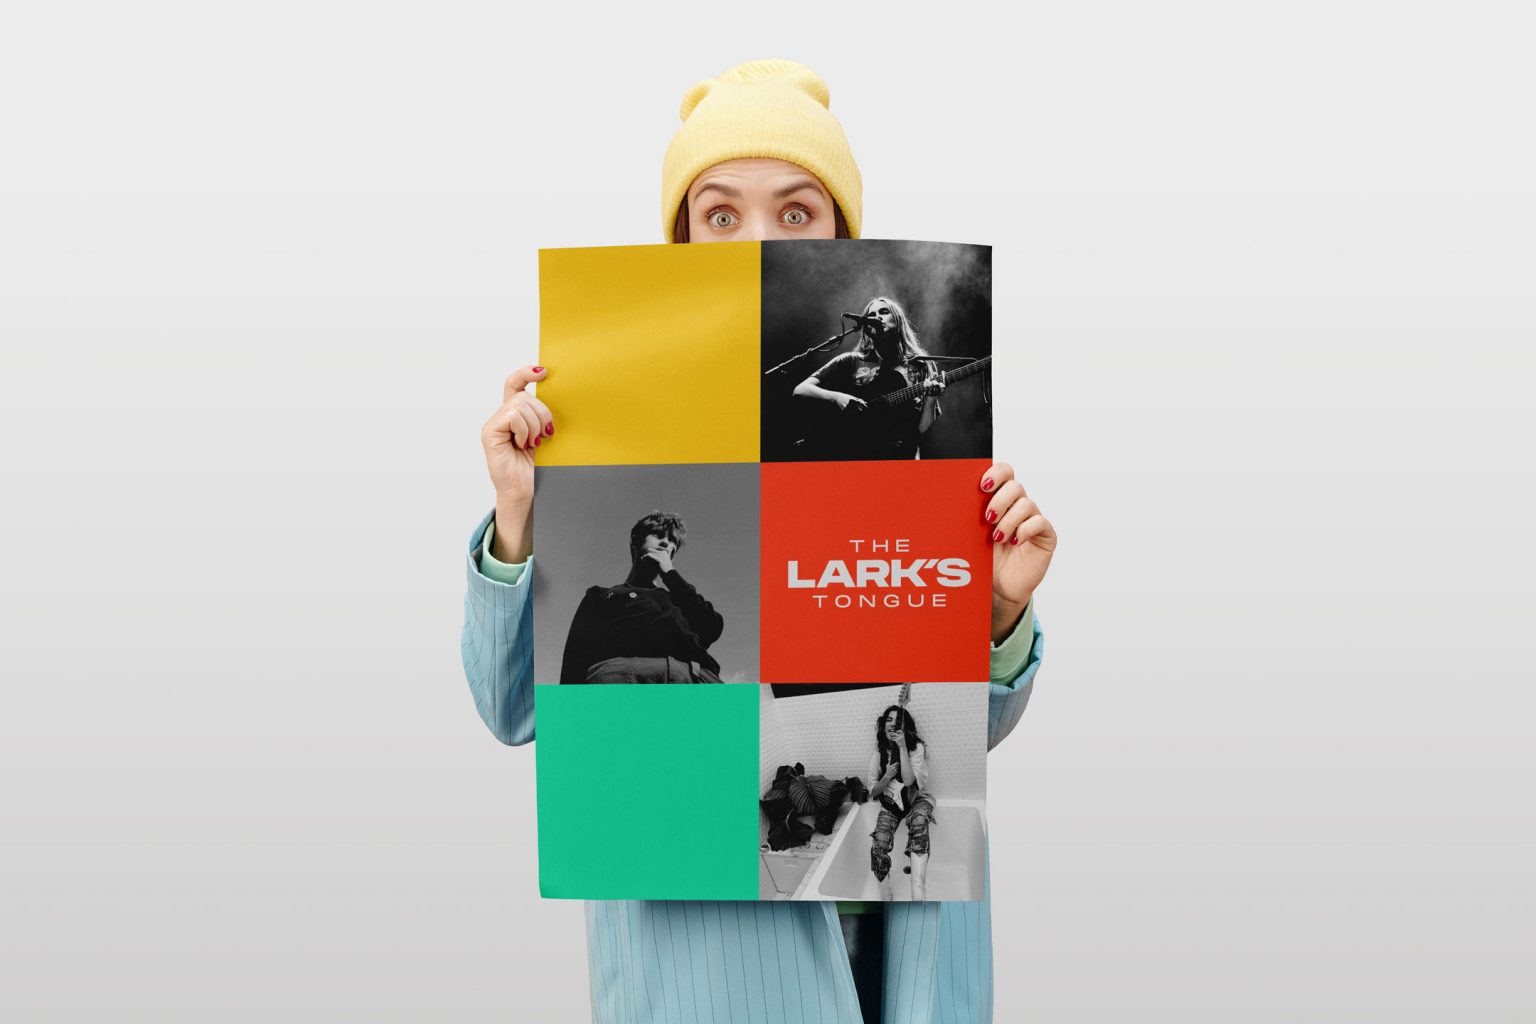 Woman holding a poster showcasing The Lark's Tongue branding